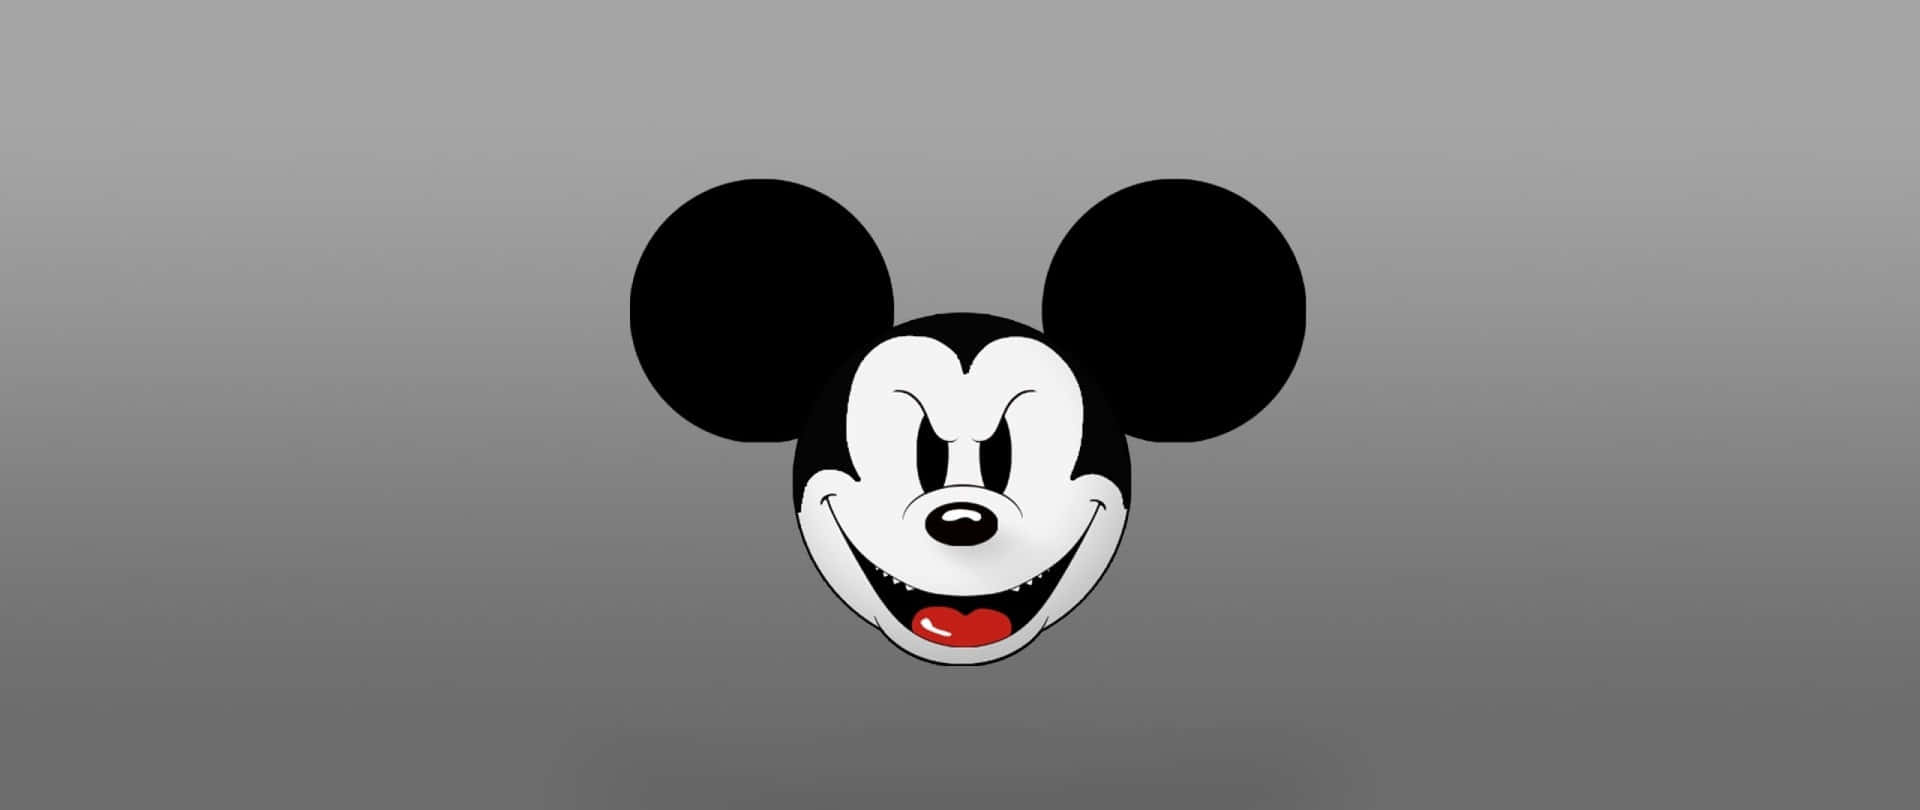 Download Mickey Mouse Ears Wallpaper 